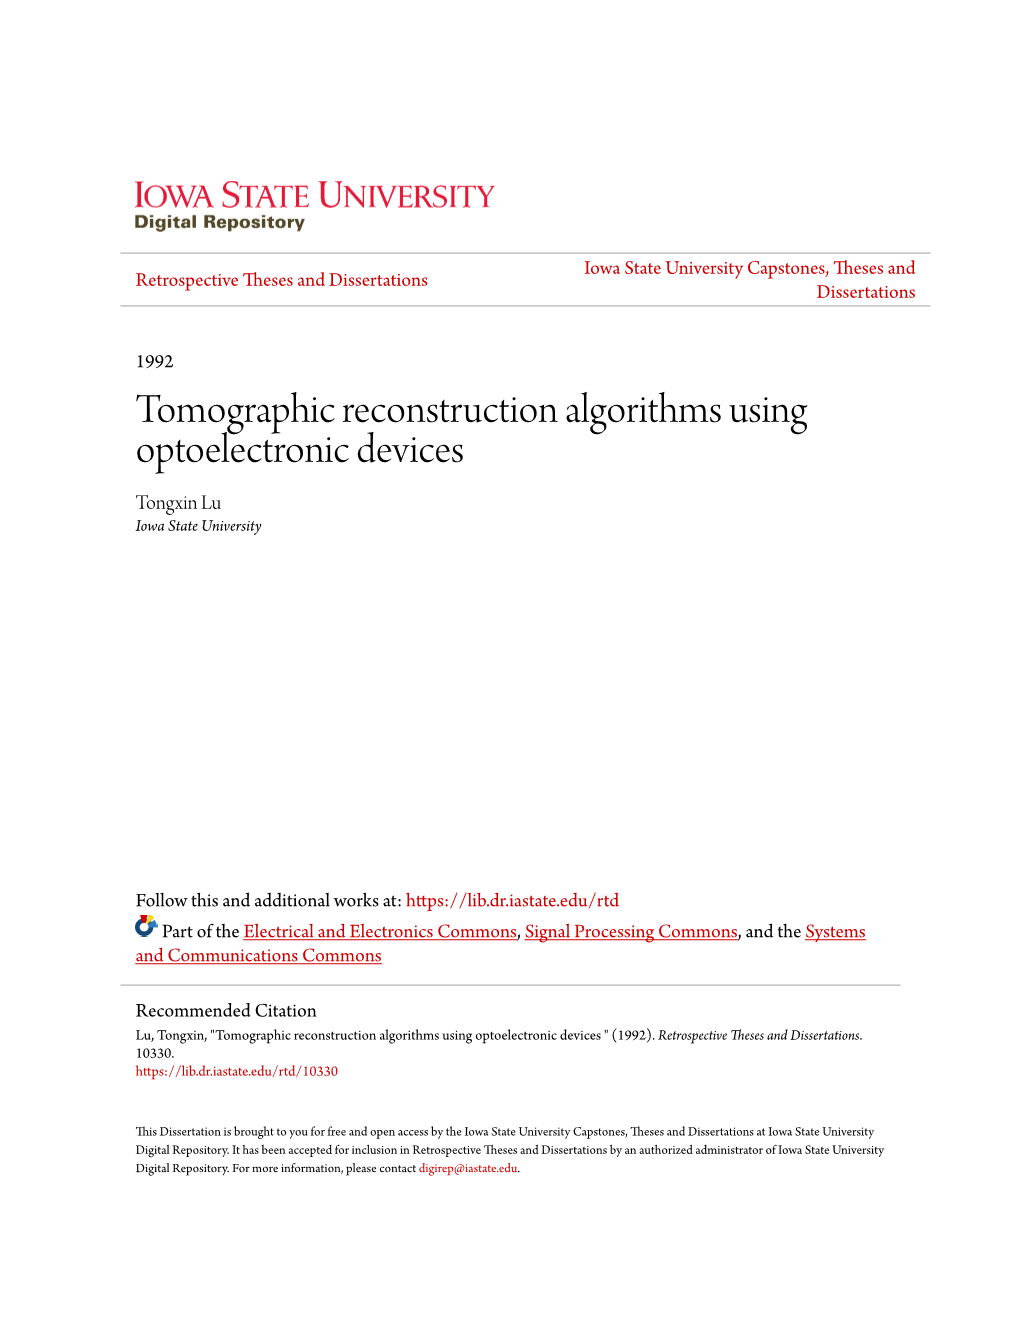 Tomographic Reconstruction Algorithms Using Optoelectronic Devices Tongxin Lu Iowa State University